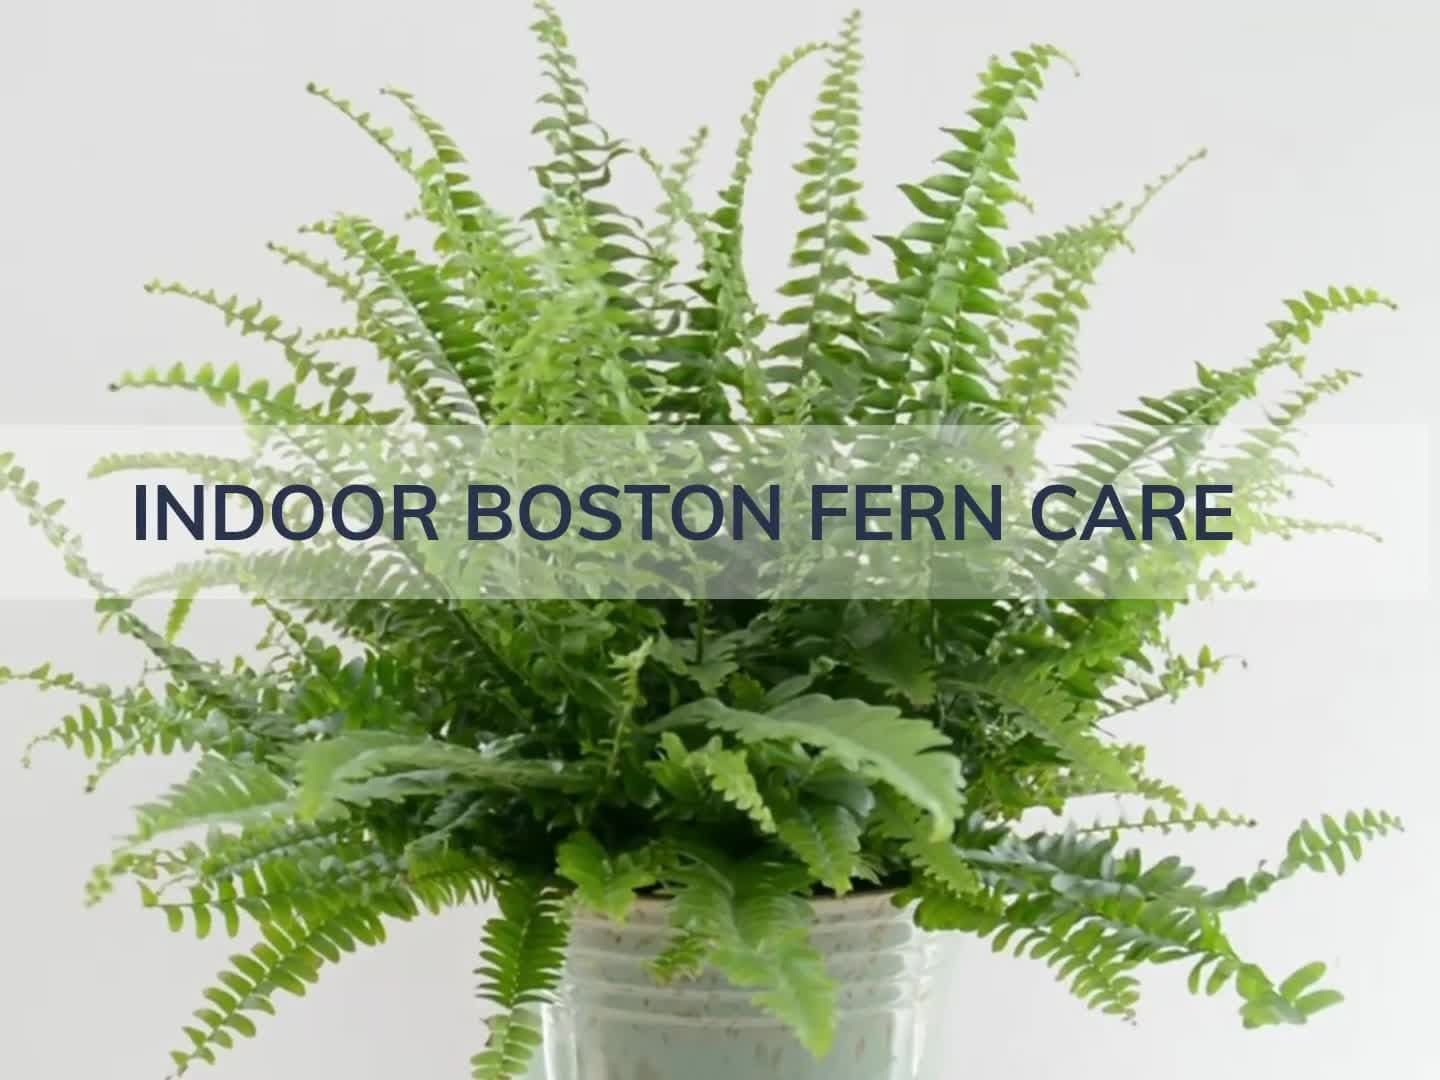 Plants by Post Humidity Loving Easy Maintain & Grow Potted Indoor Decoration Livingroom On Windowsills Bathroom or Office Safely Packaged. Houseplant Boston Fern in 12cm Plant Pot Kitchen 